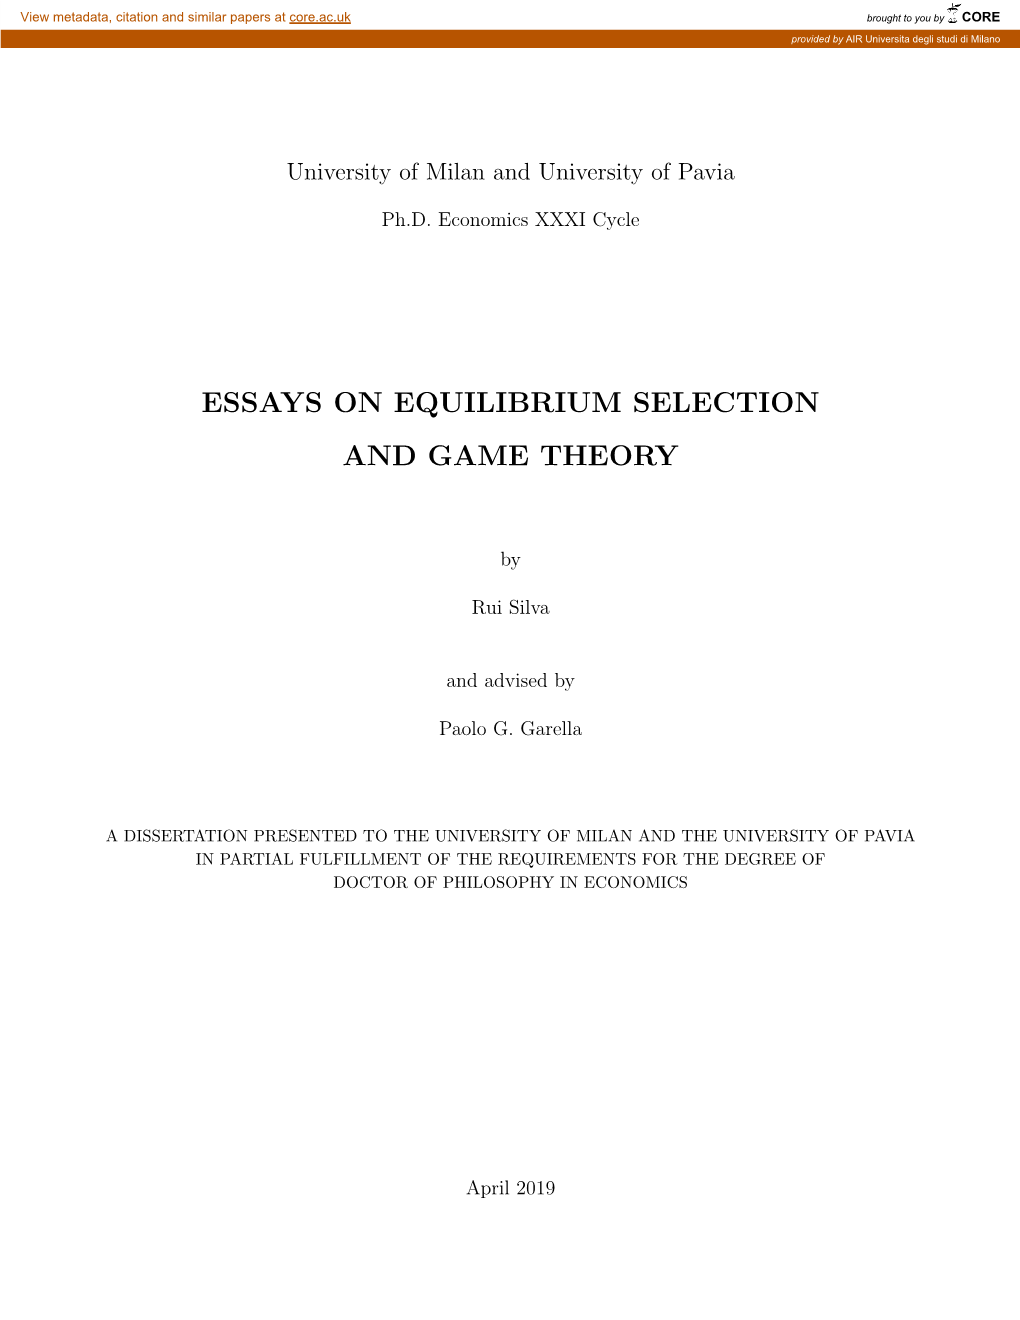 Essays on Equilibrium Selection and Game Theory